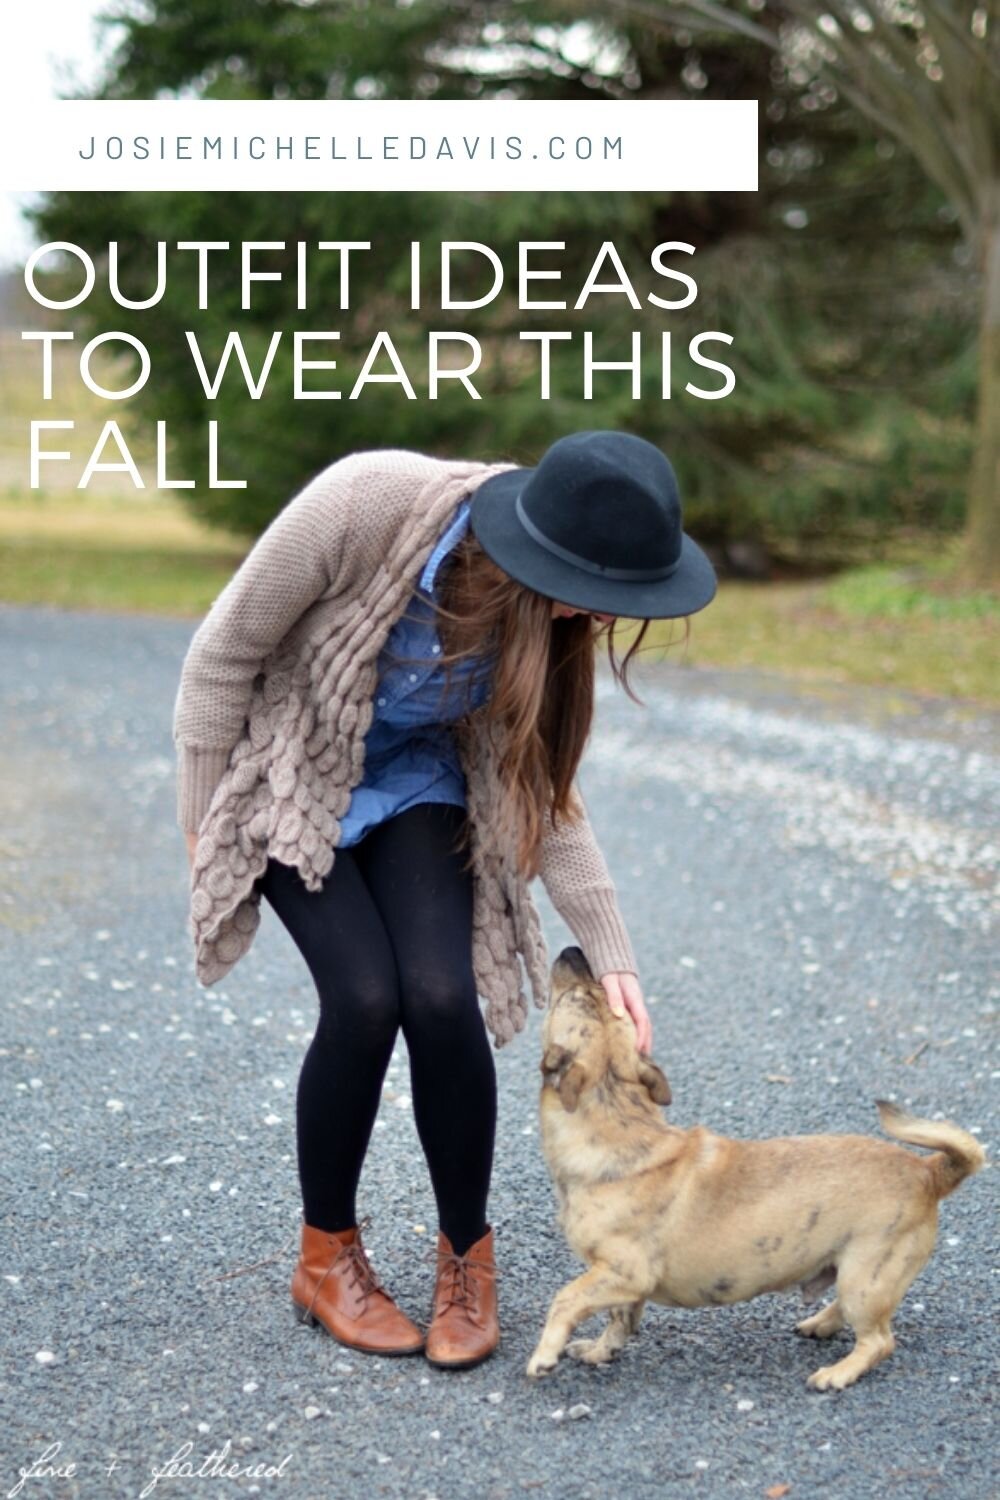 Outfits to try out this fall.